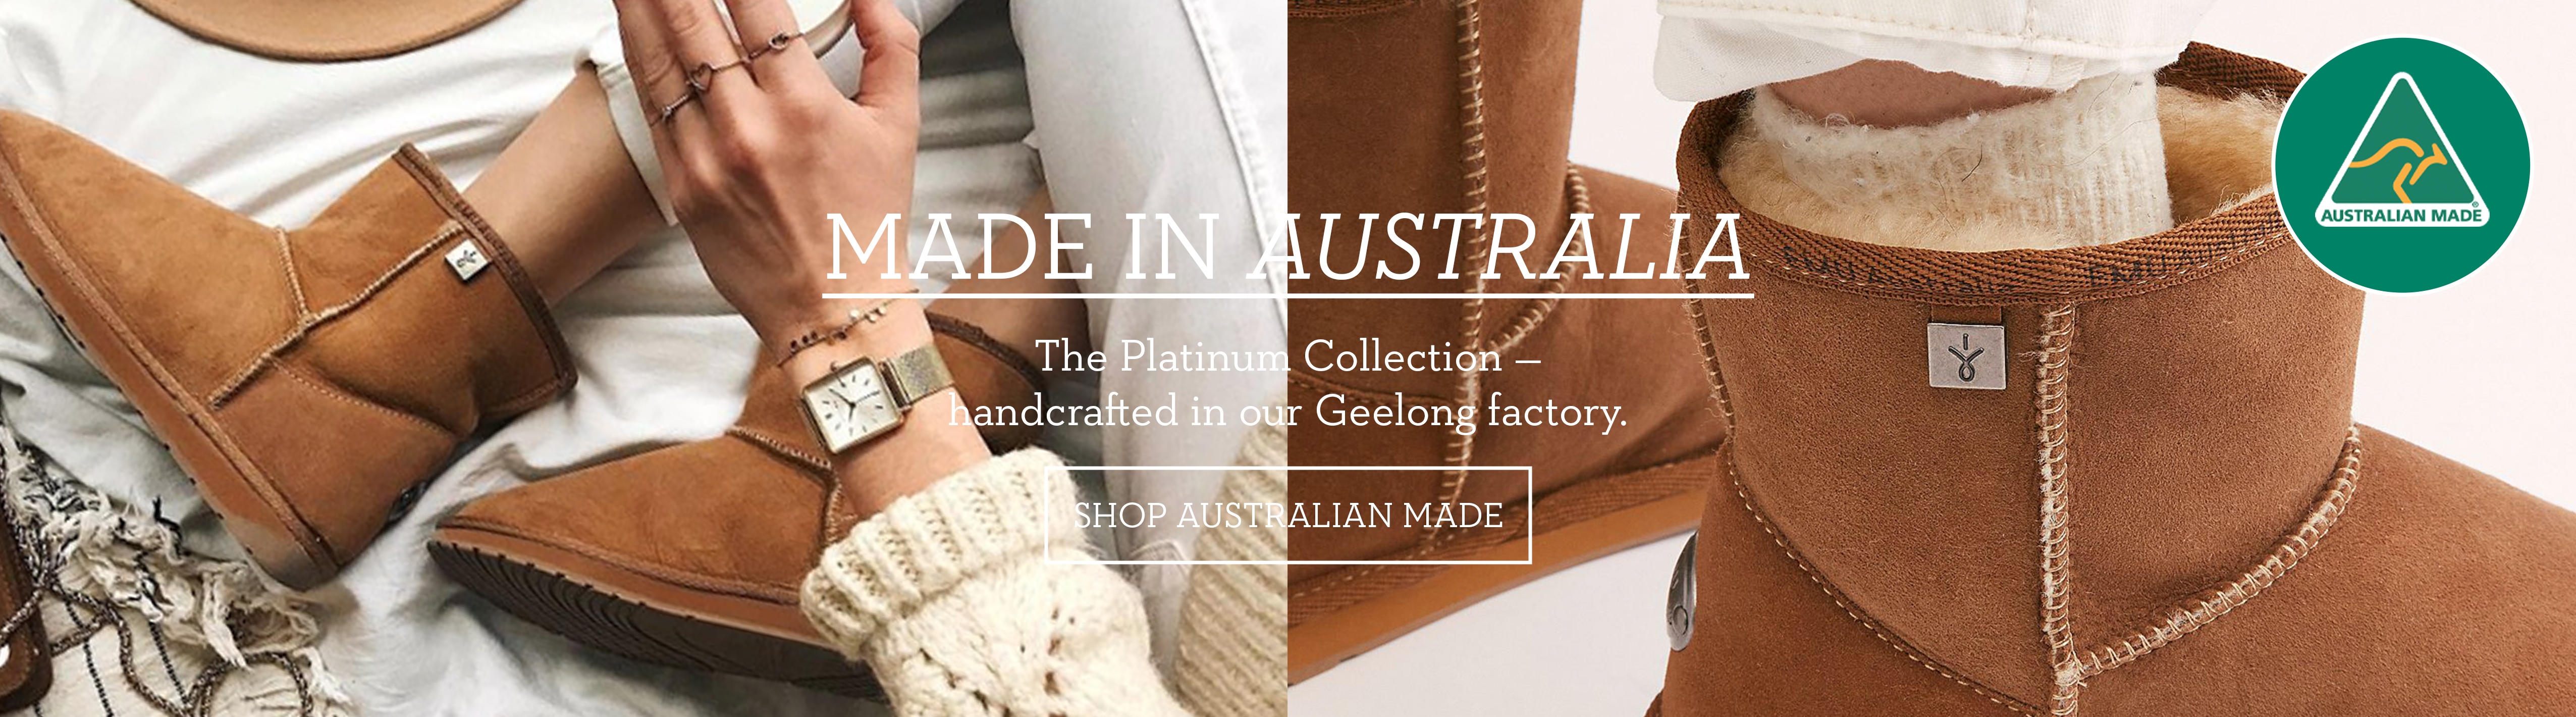 Made in Australia. The Platinum Collection - handcrafted in our Geelong factory. Shop Now.